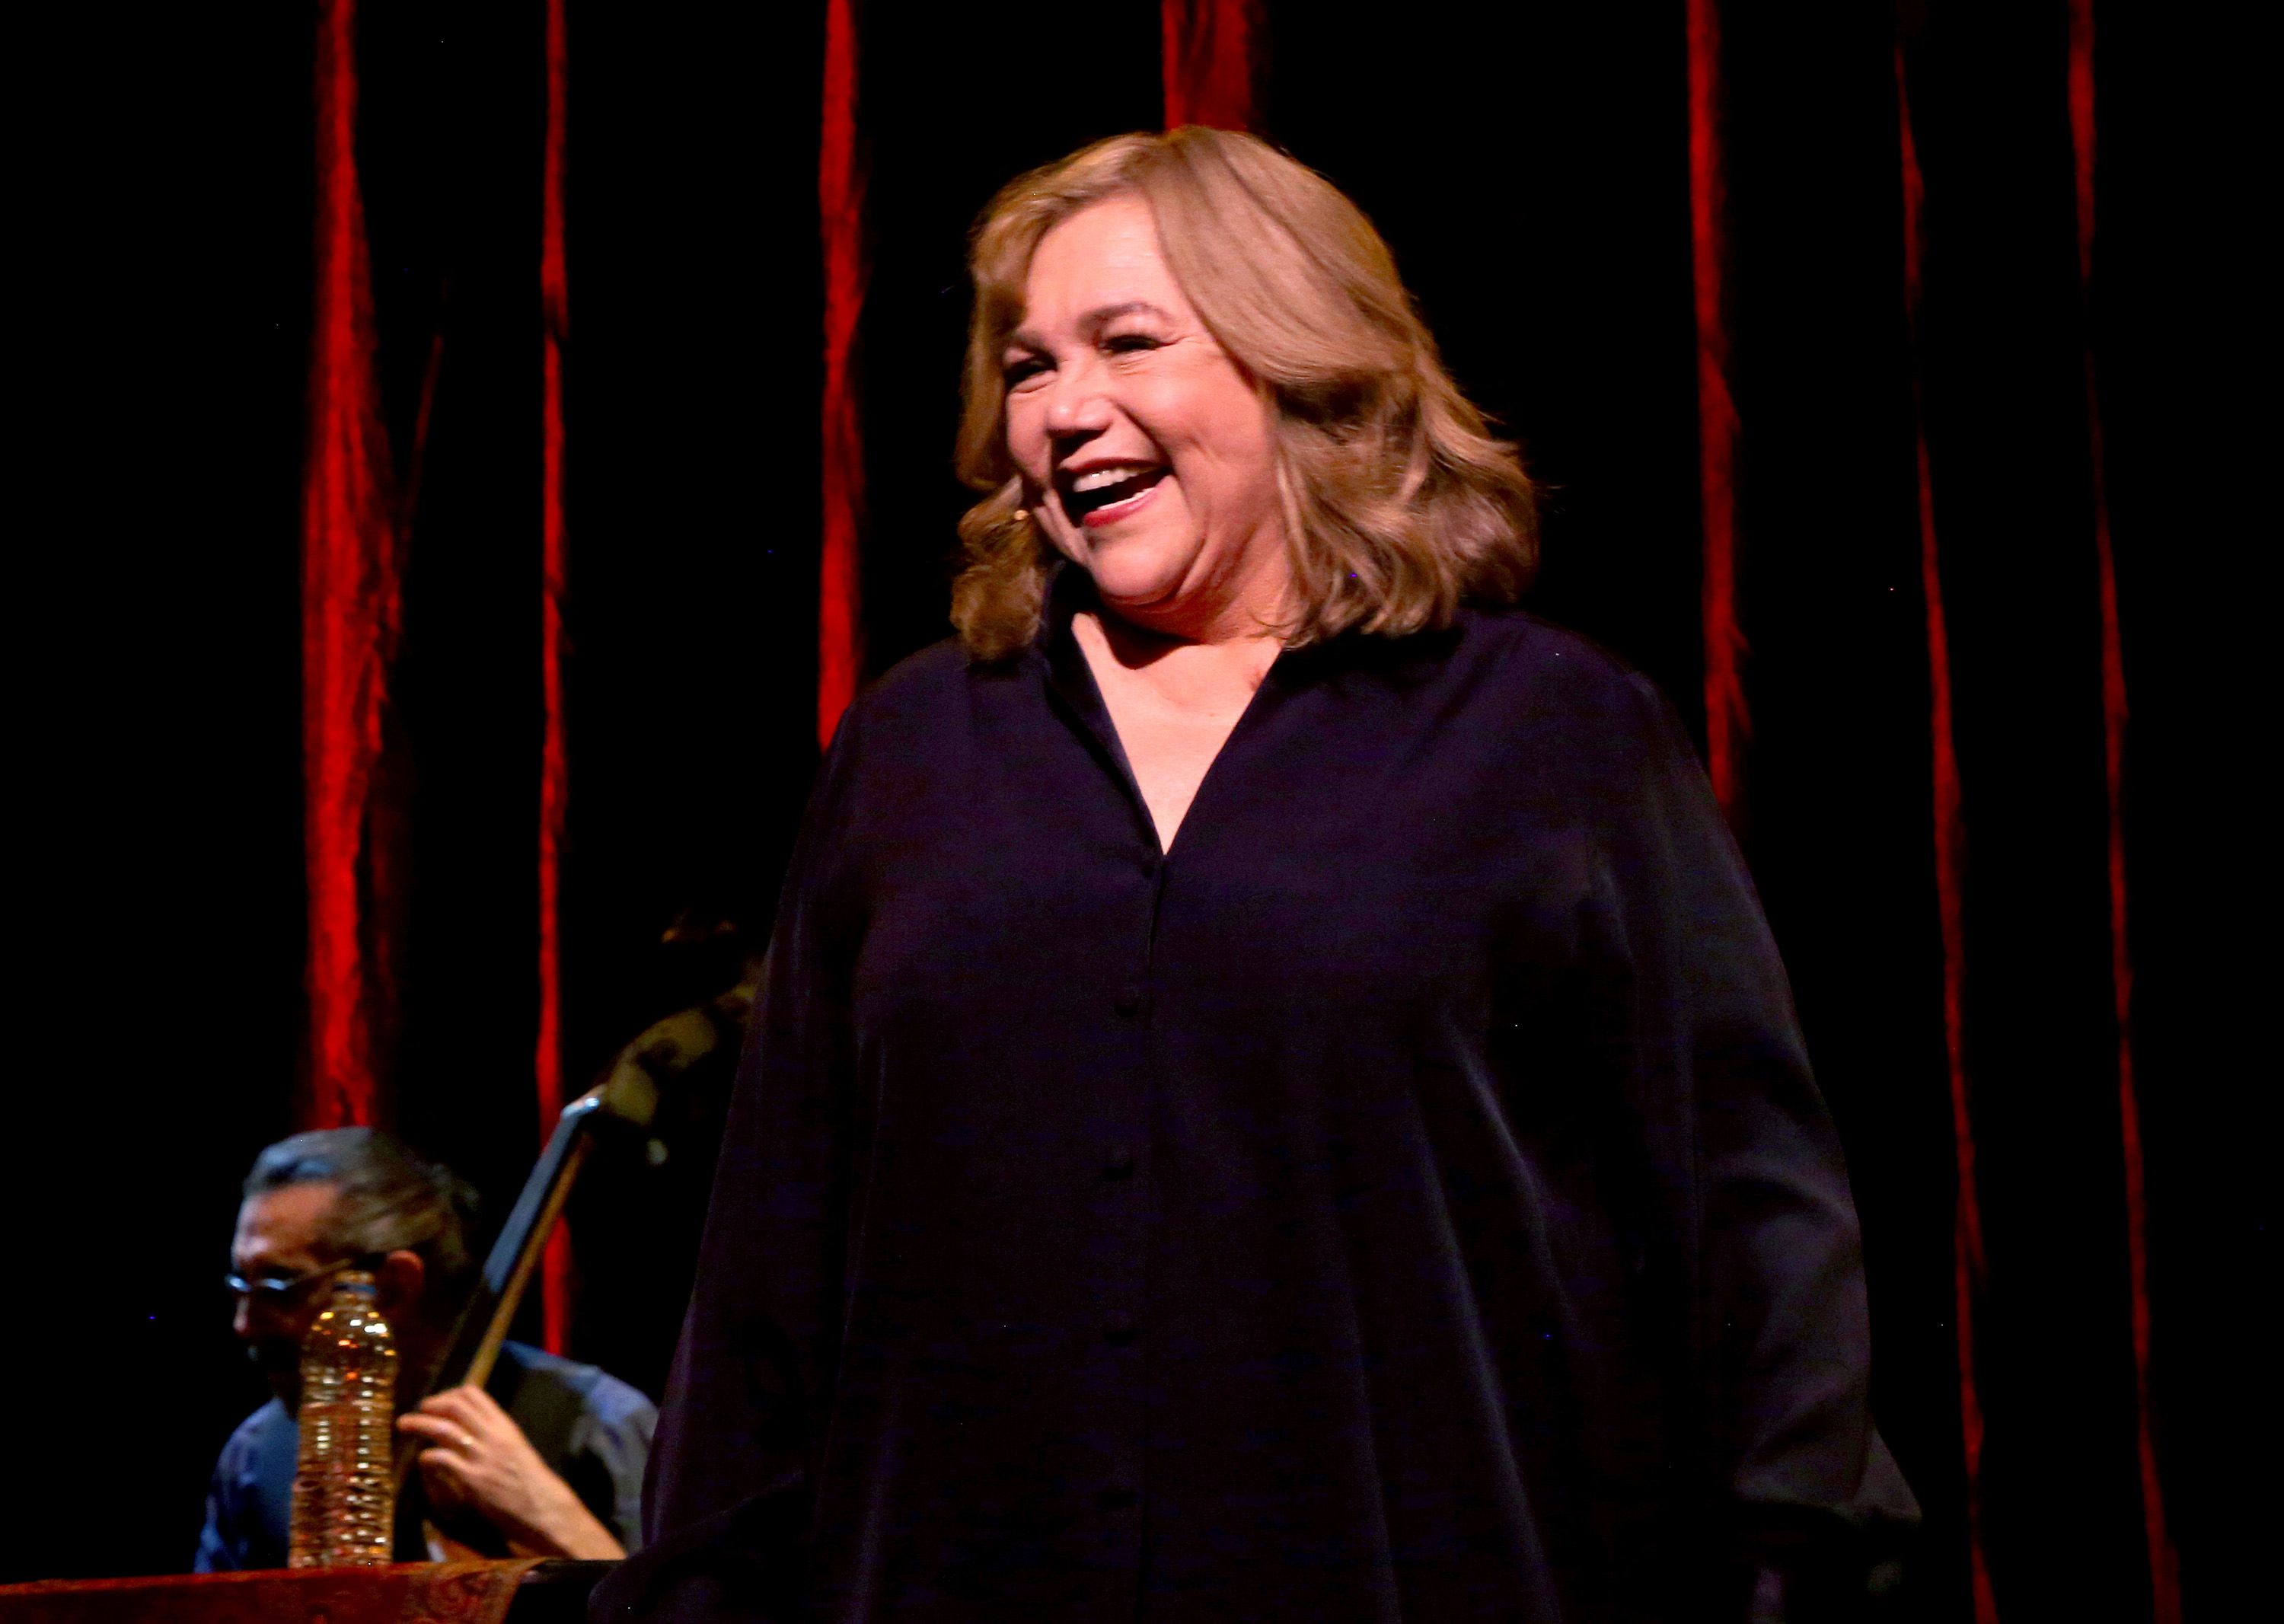 Kathleen Turner during the opening night curtain call for "Kathleen Turner: Finding My Voice" on Broadway at Town Hall on December 16, 2021 in New York City. | Source: Getty Images